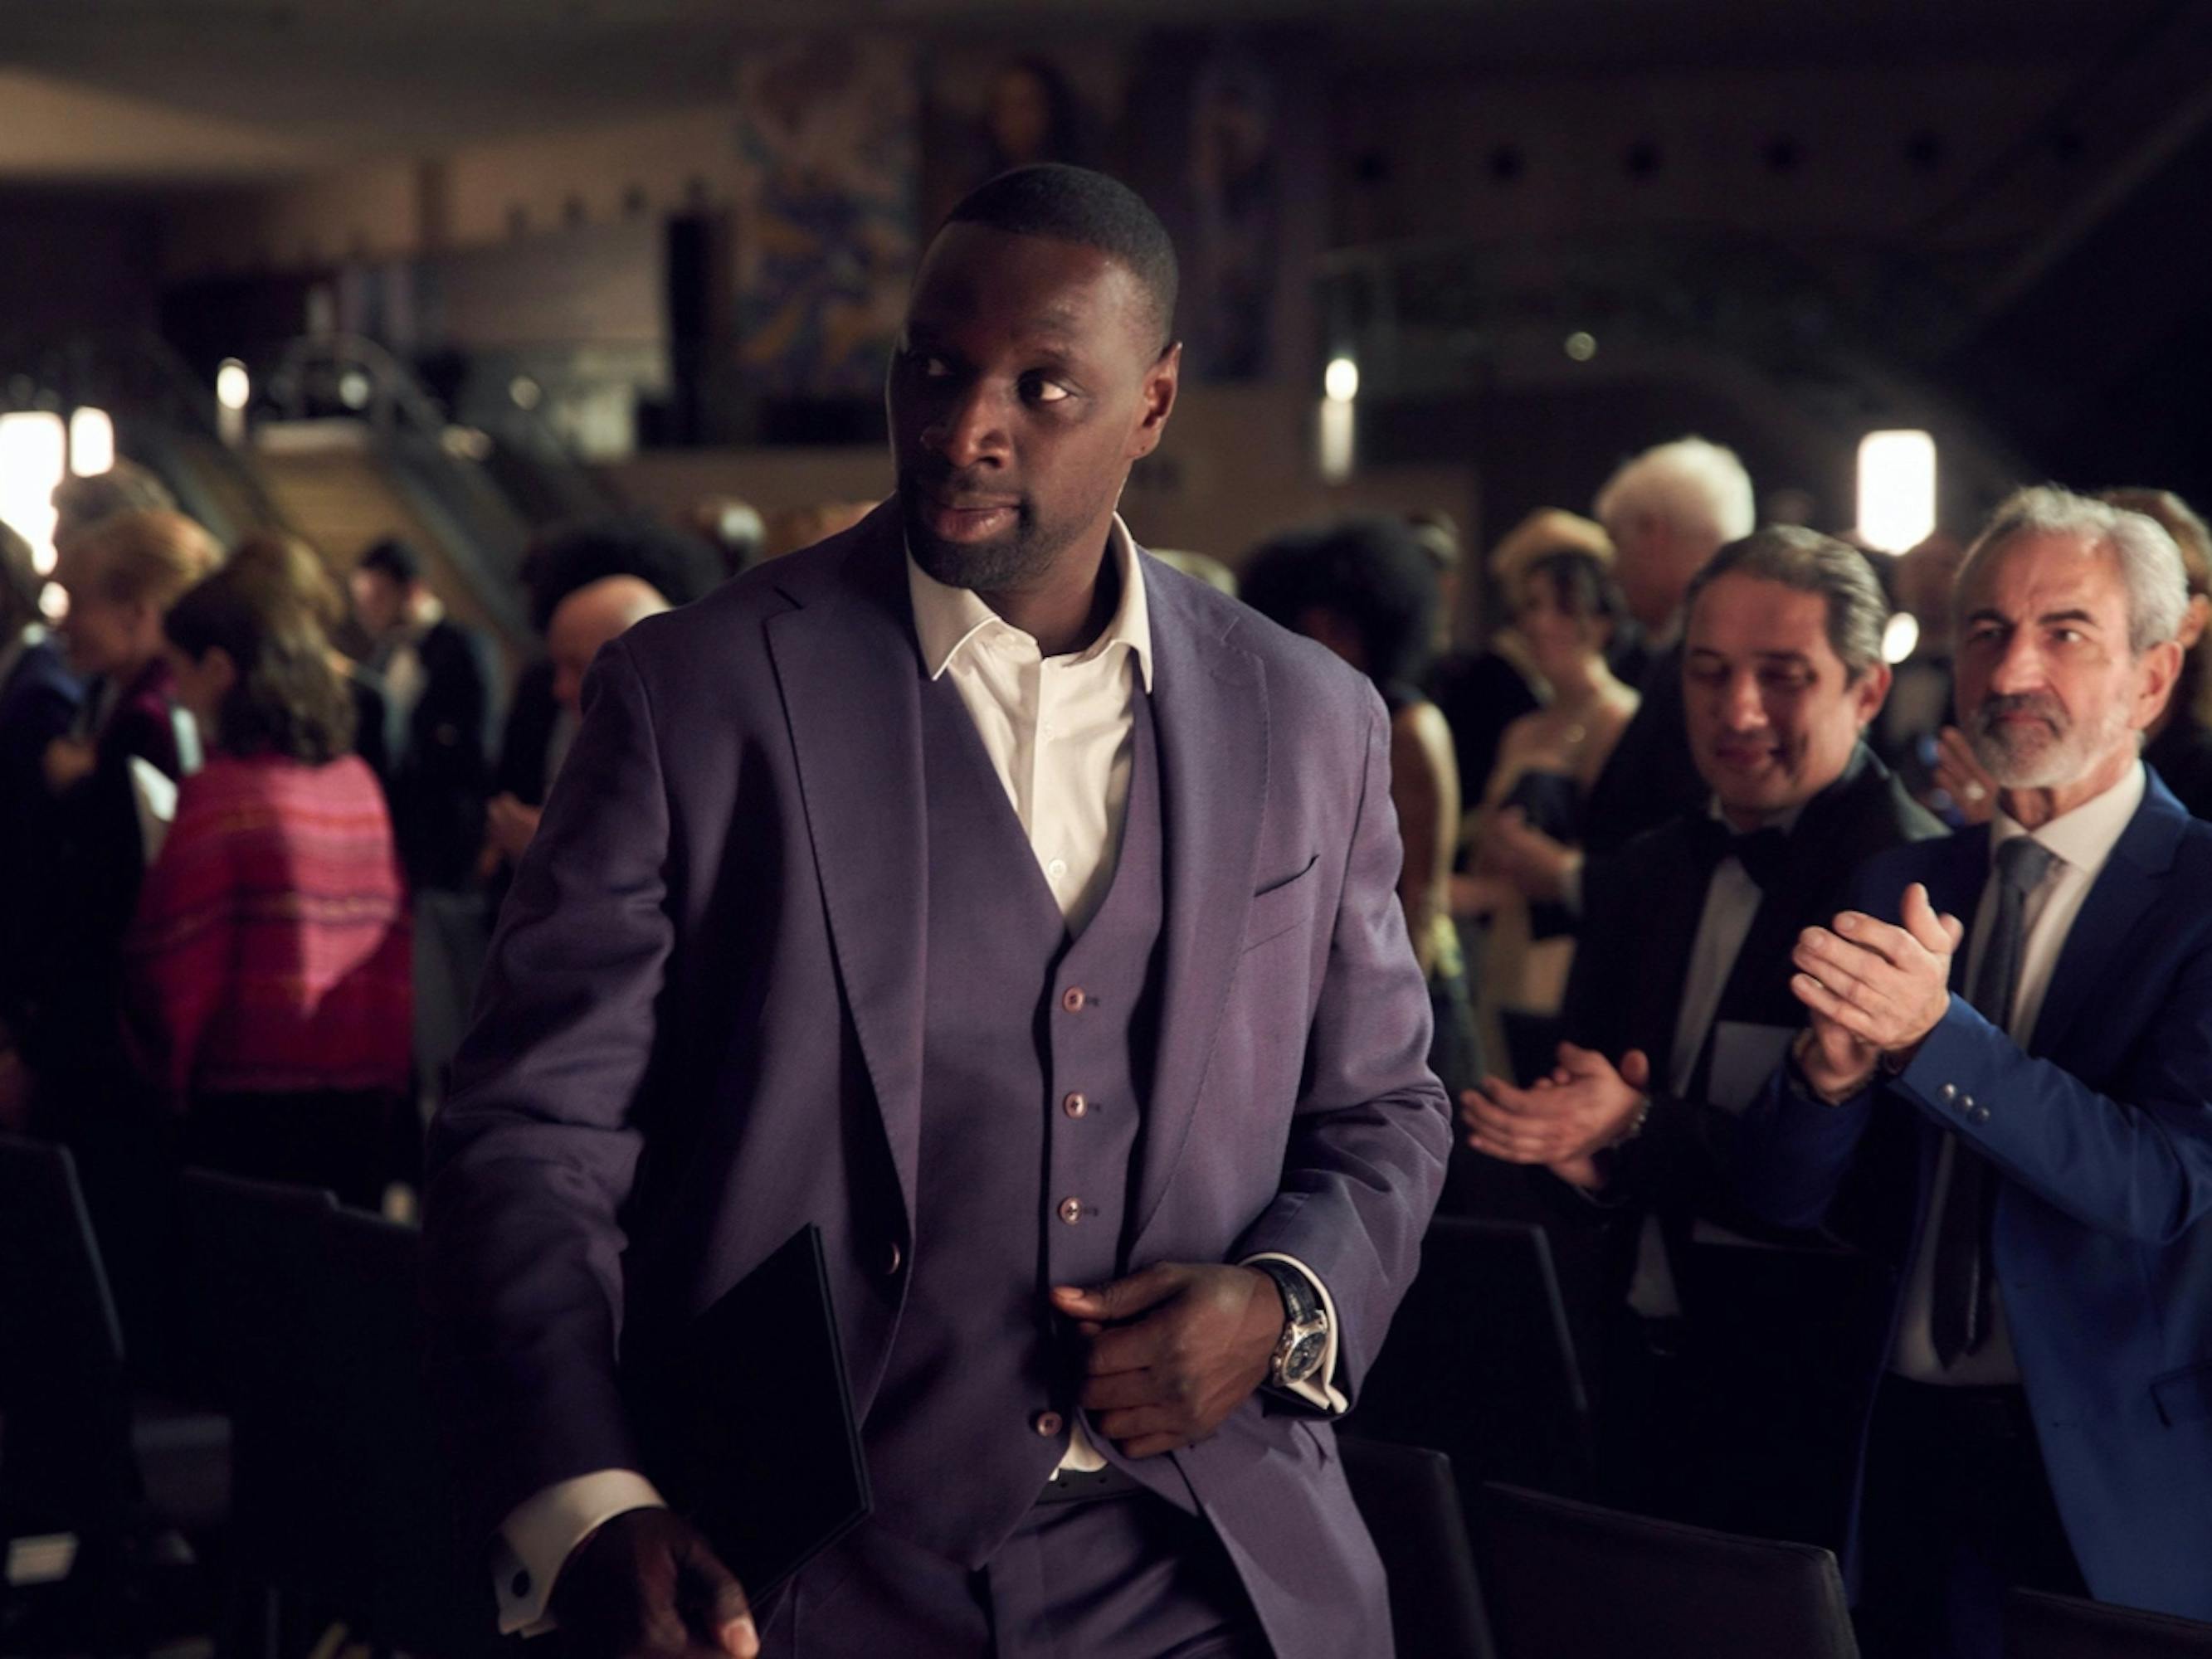 Assane Diop (Omar Sy) walks through a crowd as onlookers clap. He wears a stunning navy suit, watch, and white shirt.